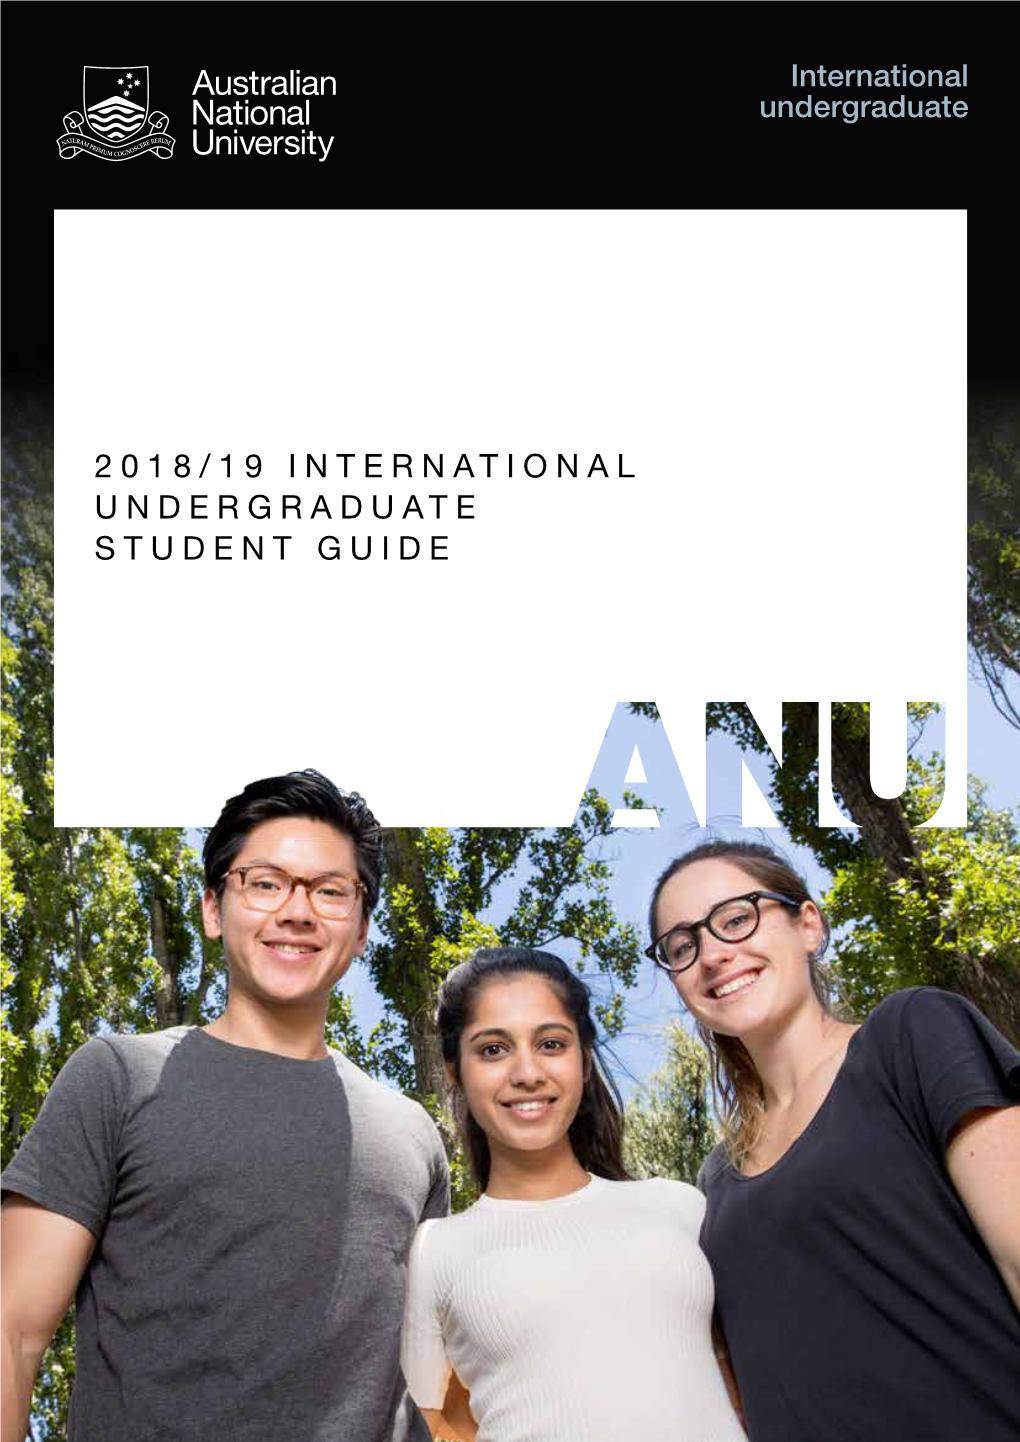 2018/19 International Undergraduate Student Guide Message from the Vice -Chancellor